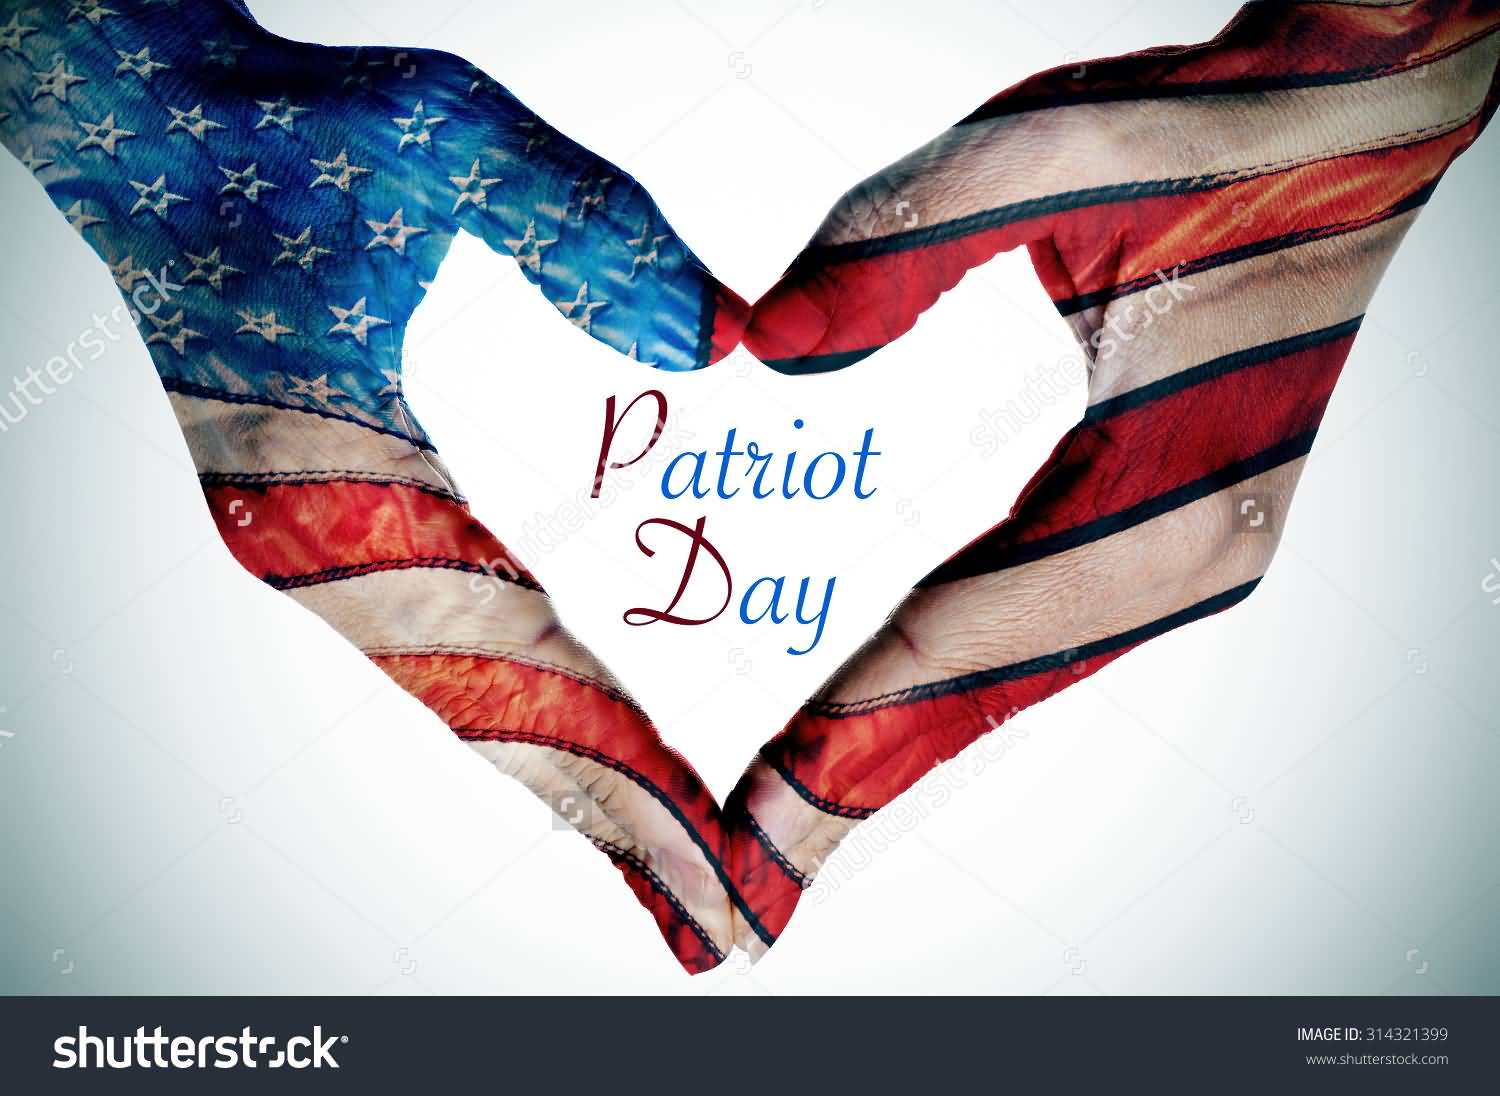 Patriot Day American Flag Hands Picture